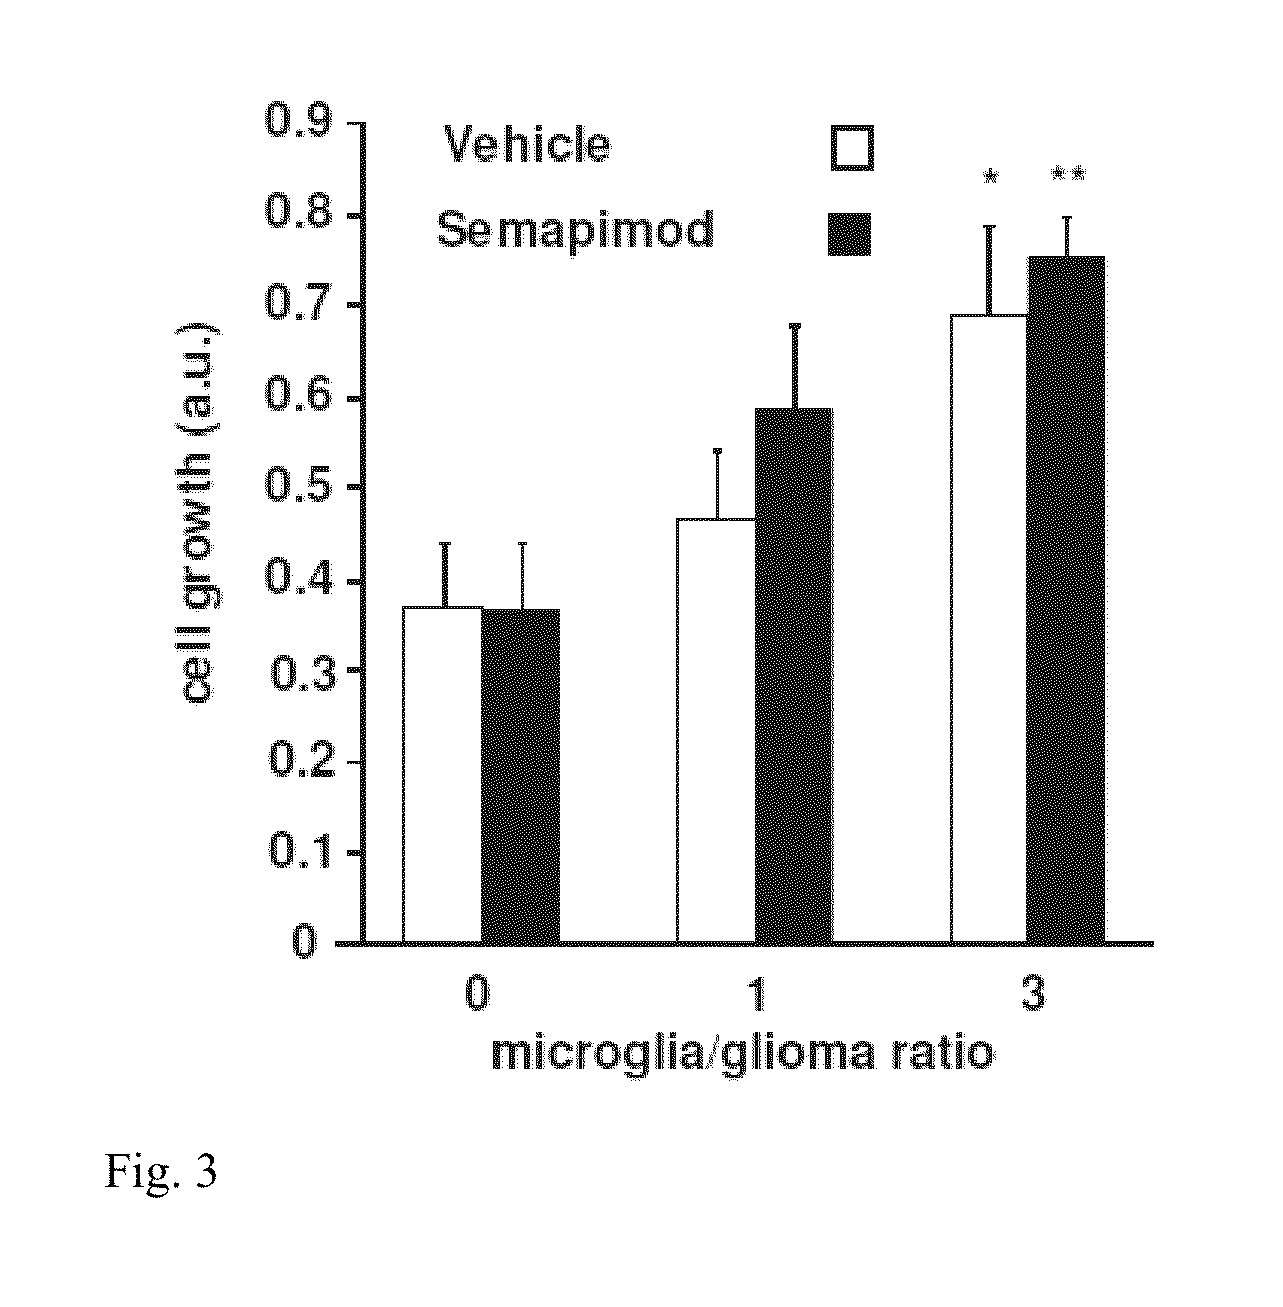 Method for treating glioblastomas and other tumors